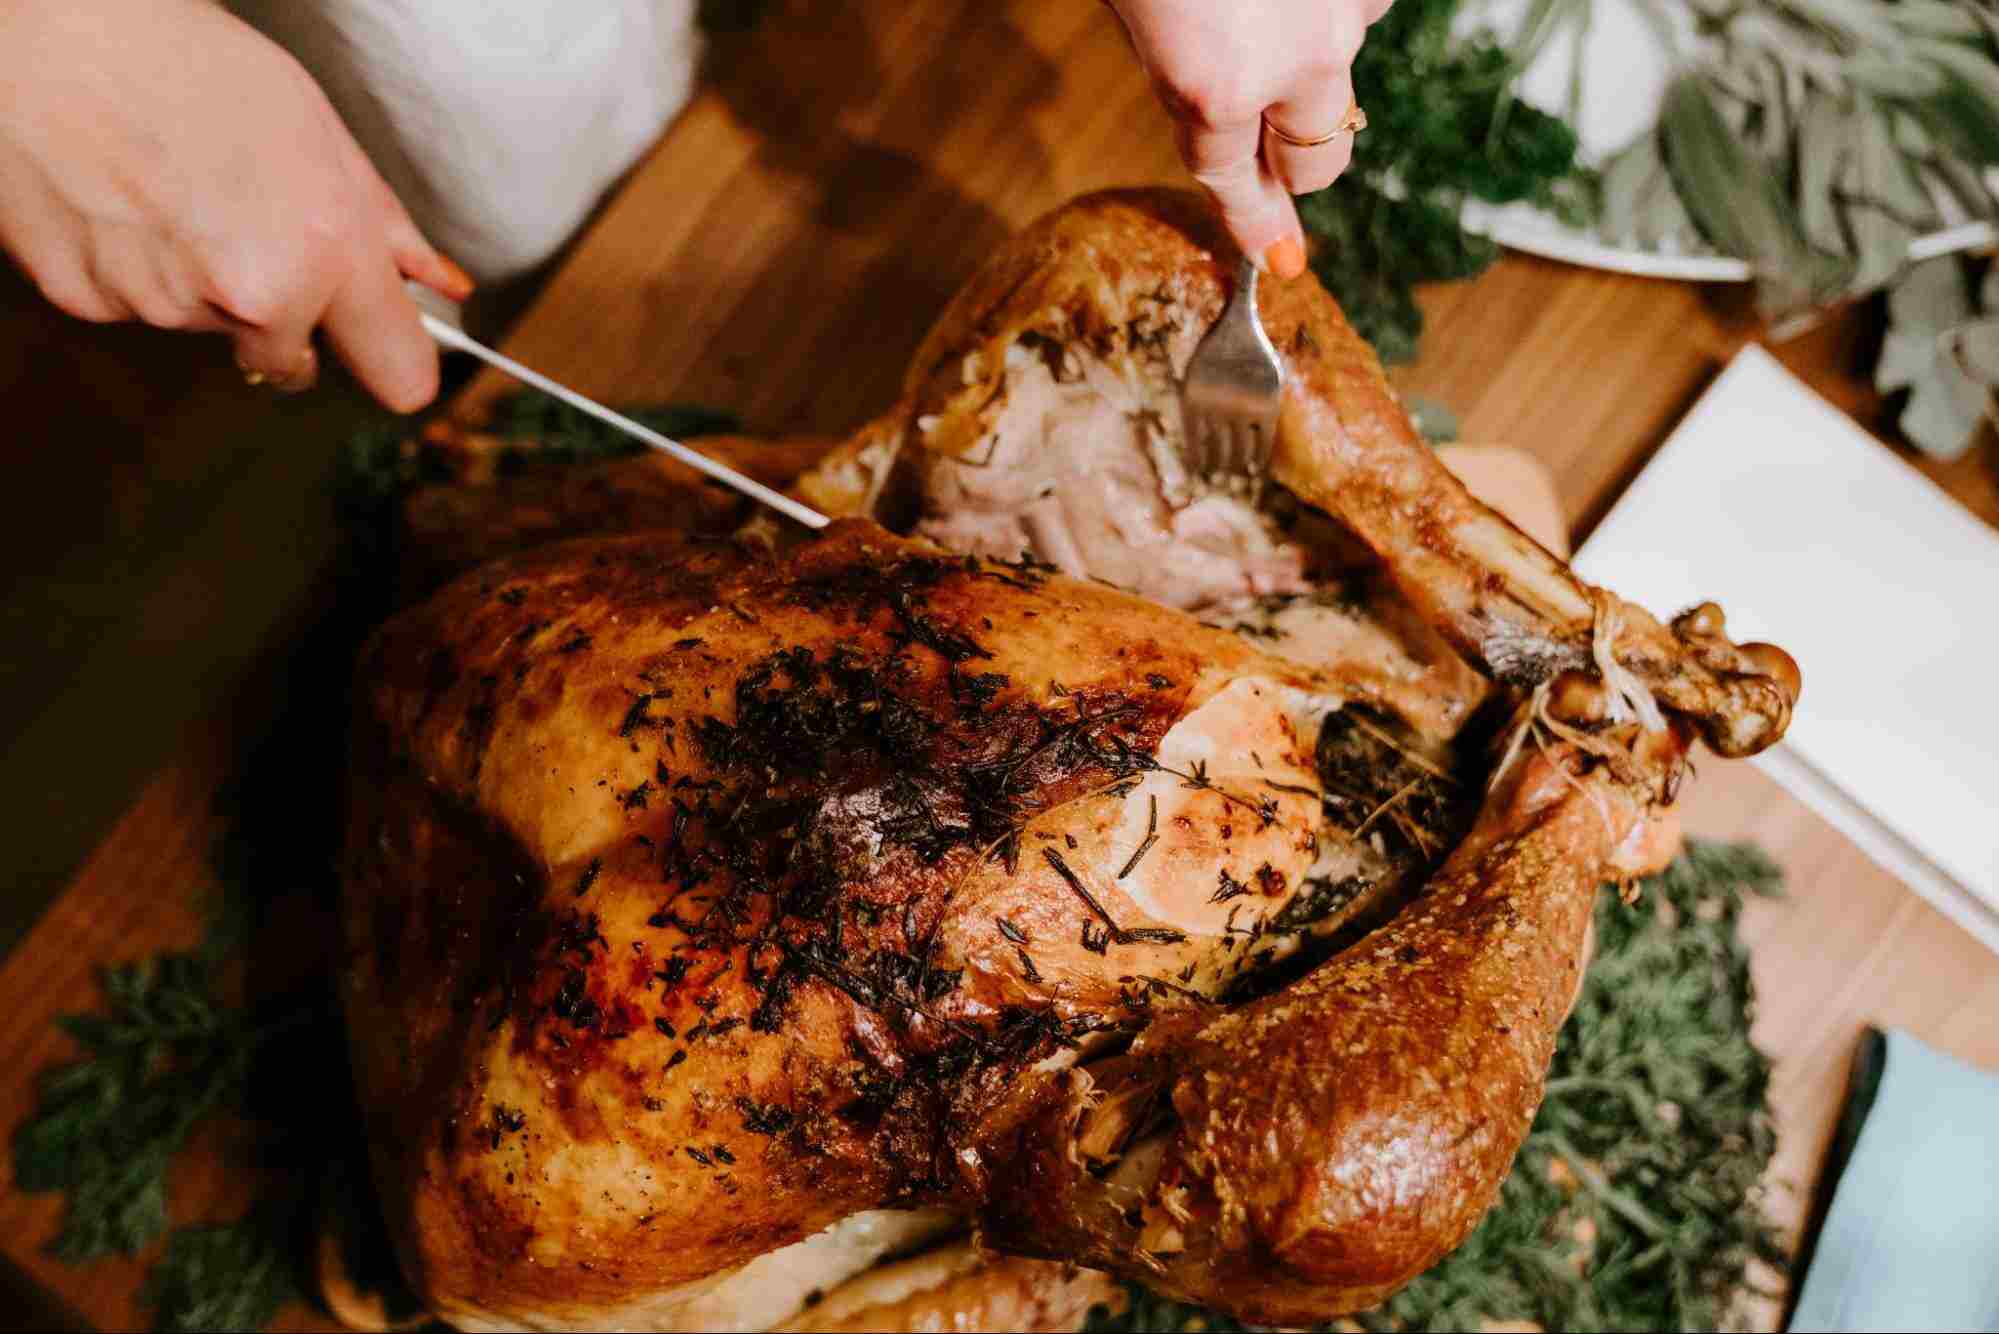 Hands Carving a Turkey With Knife and Carving Fork